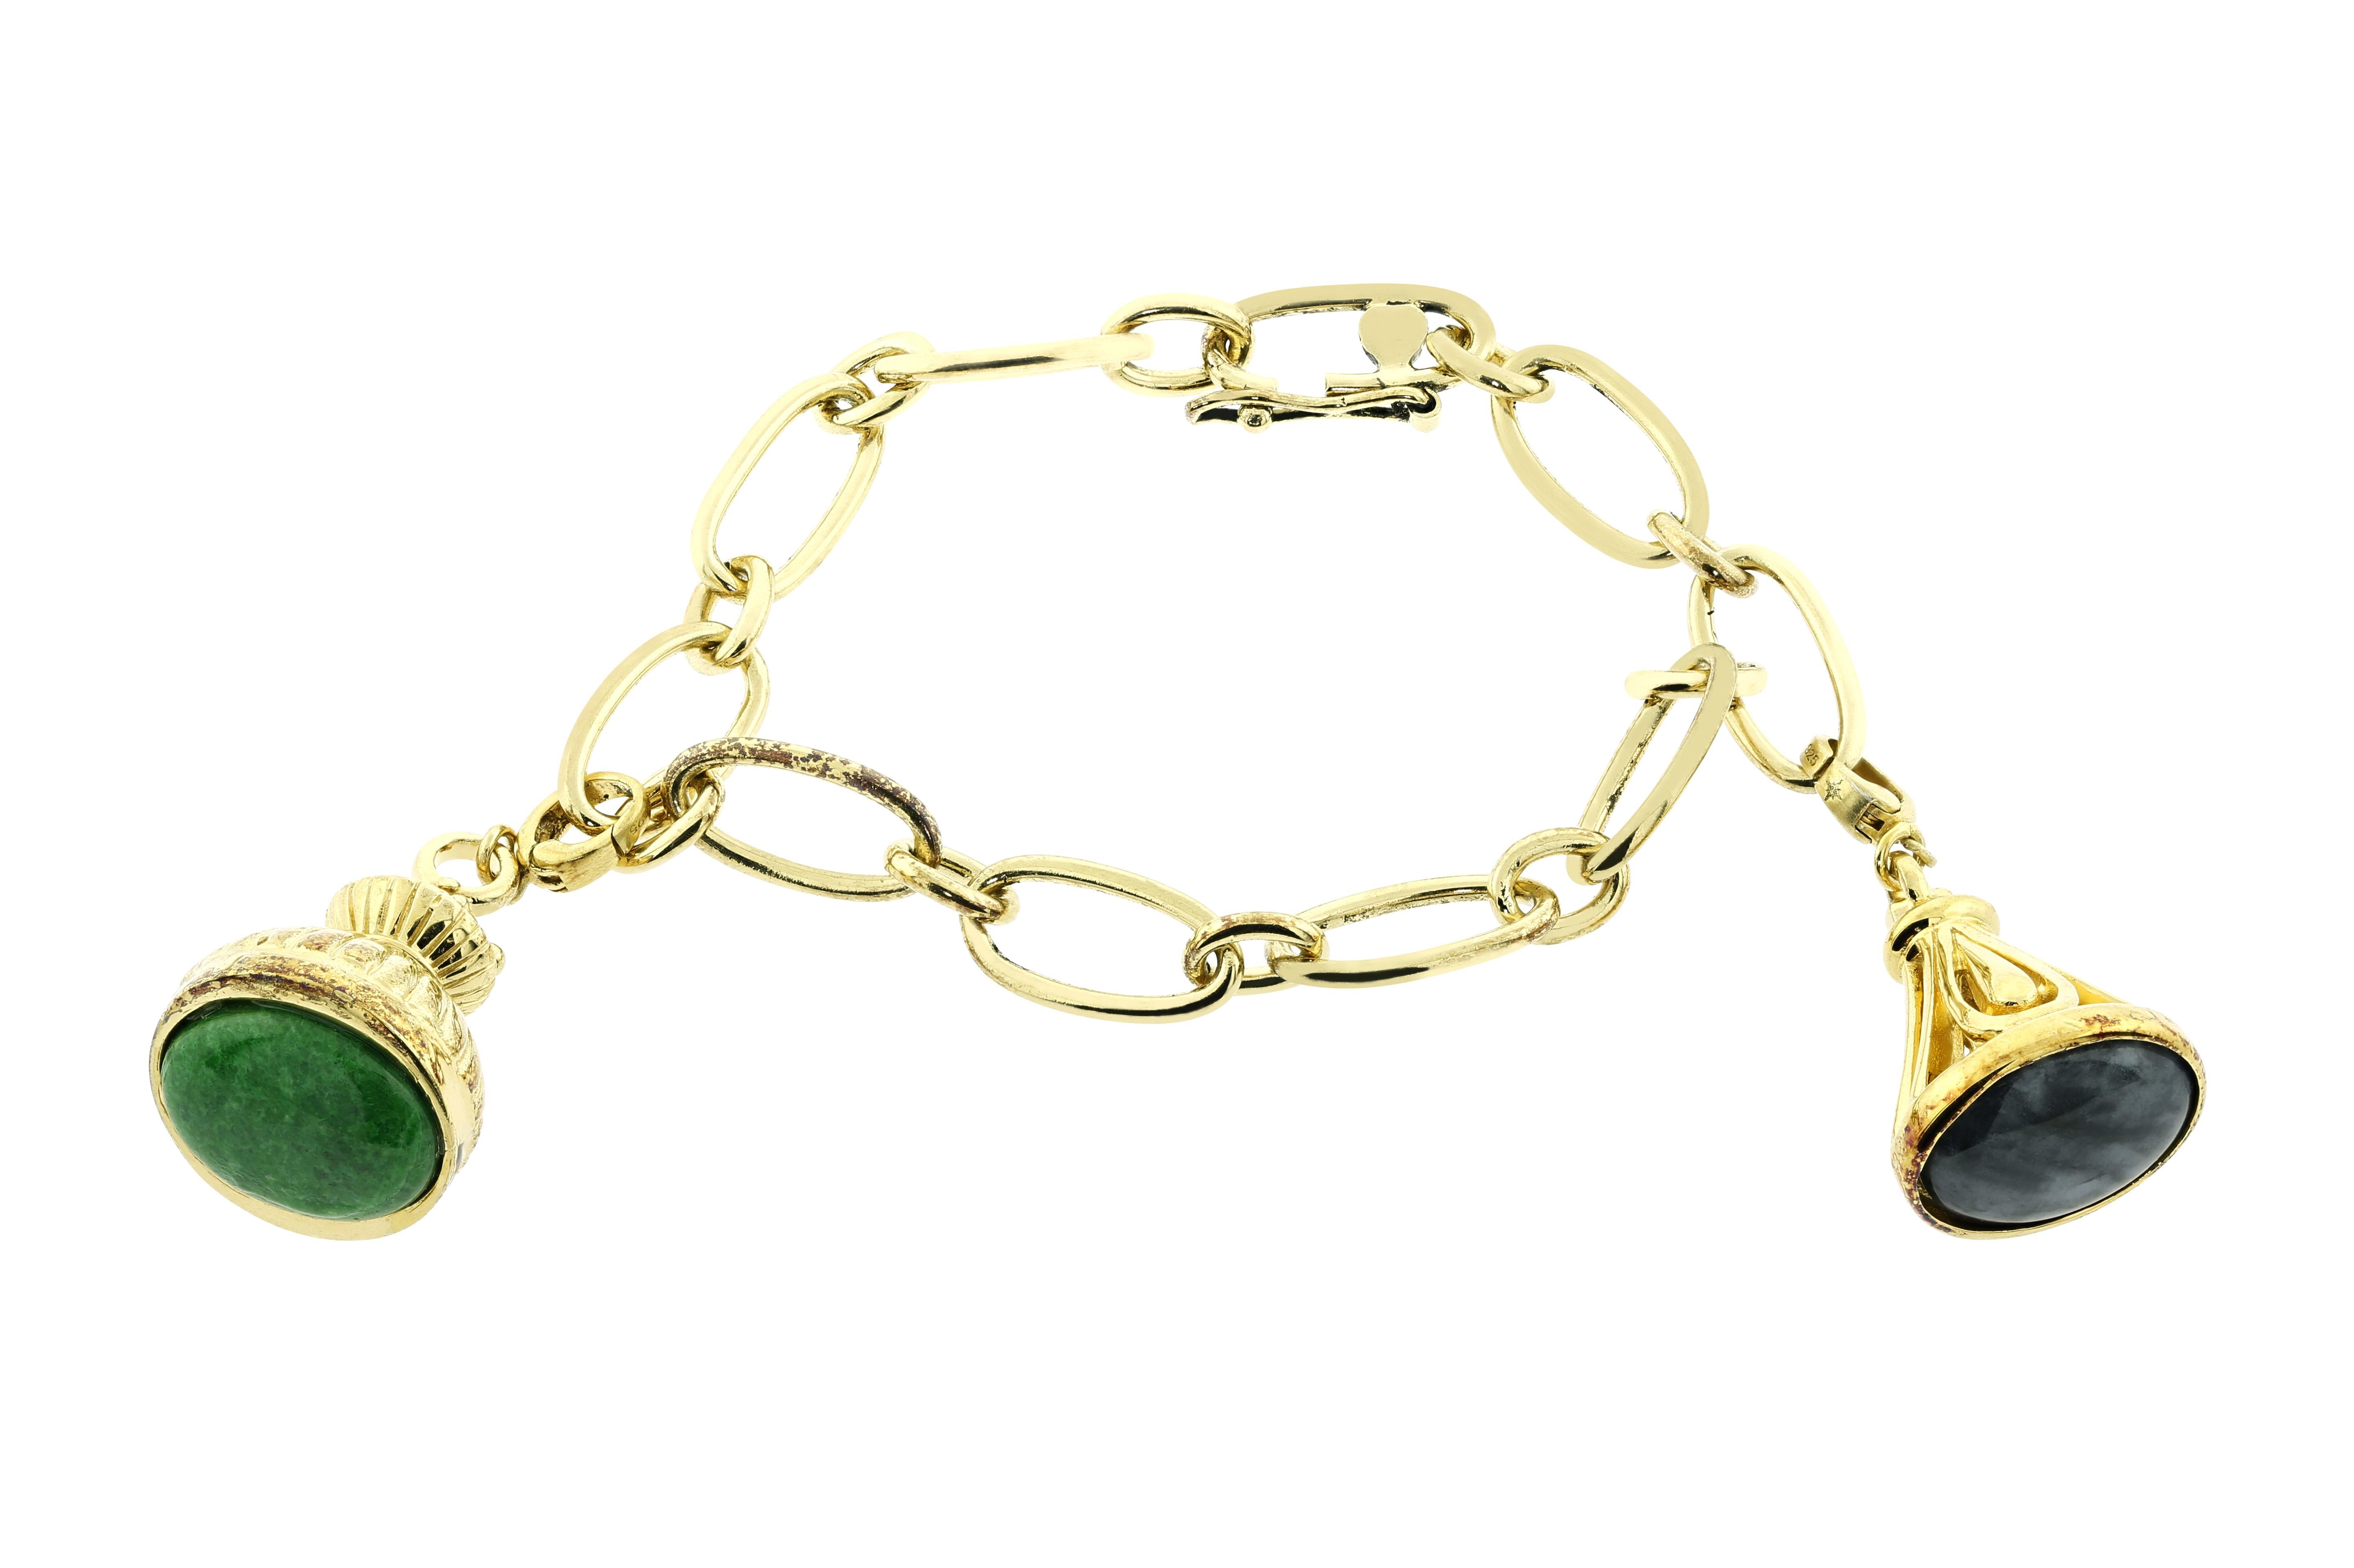 Bochic Vintage jade charm link bracelet. 
Sterling silver and gold plating links and crowns. 
Green vintage jade. 
Black vintage jade. 
Blue Vintage turquoise. 
You can add and detach charms. 
7.5 inch diameter. 
Signed. 
Comes with a Bochic Velvet